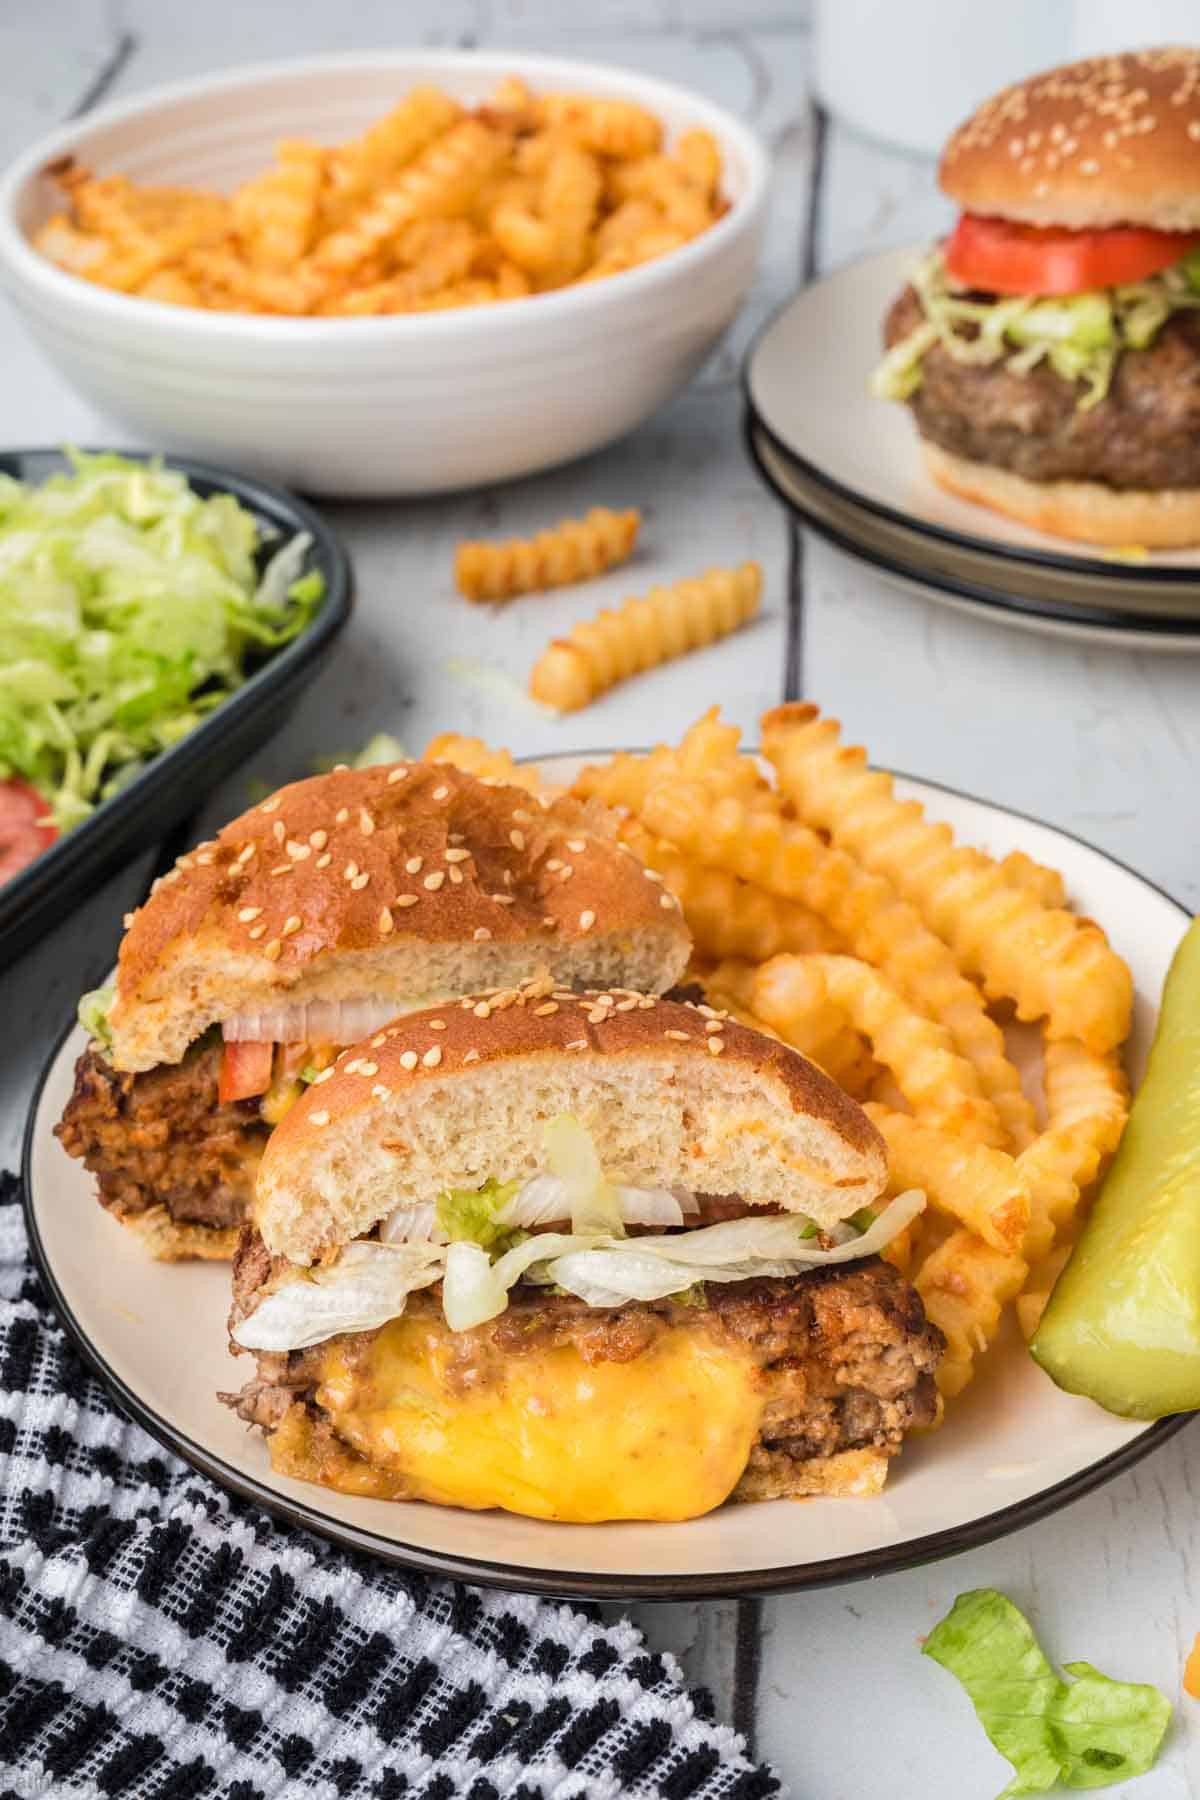 Juicy Lucy Burger cut in half on a plate with french fries